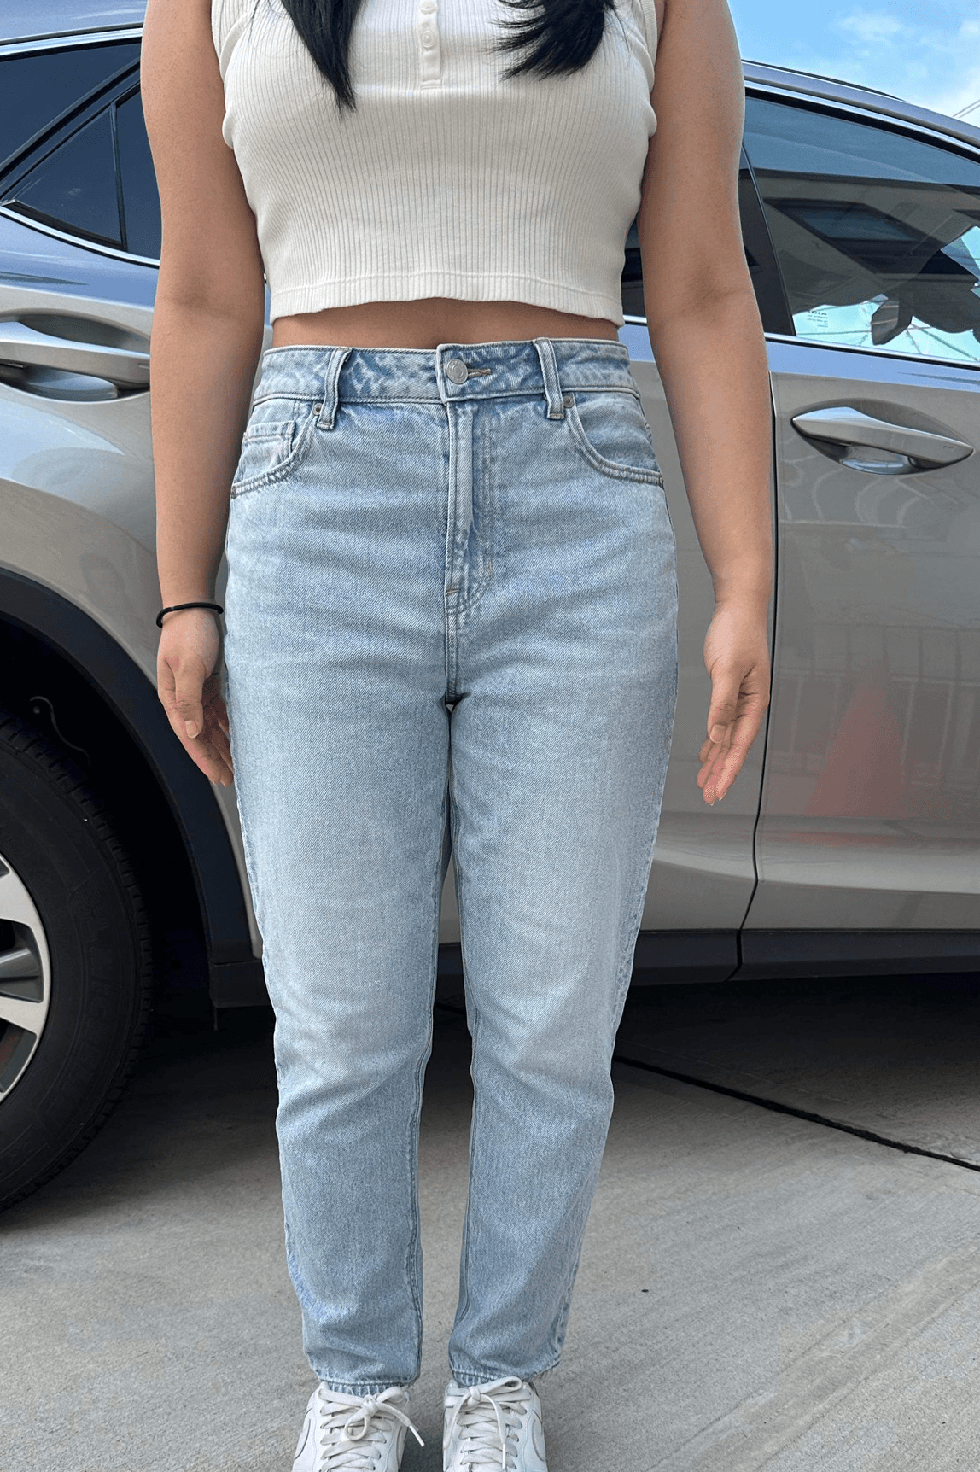 A jeans for petite women.